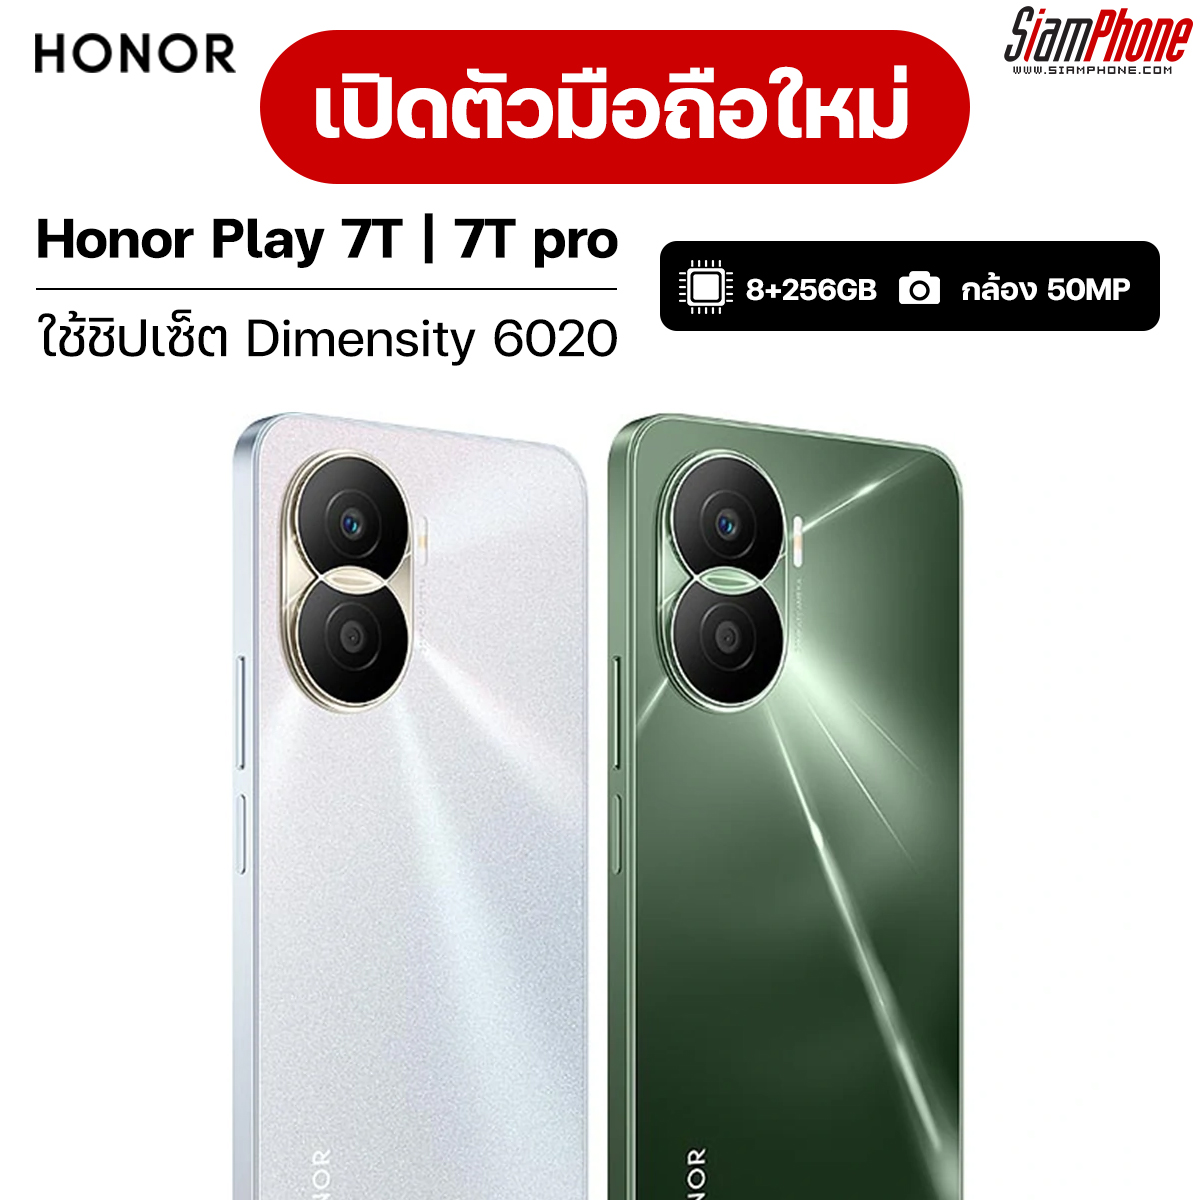 Honor Play 7T and 7T Pro with large screen, Dimensity 6020 chipset, 50MP rear camera